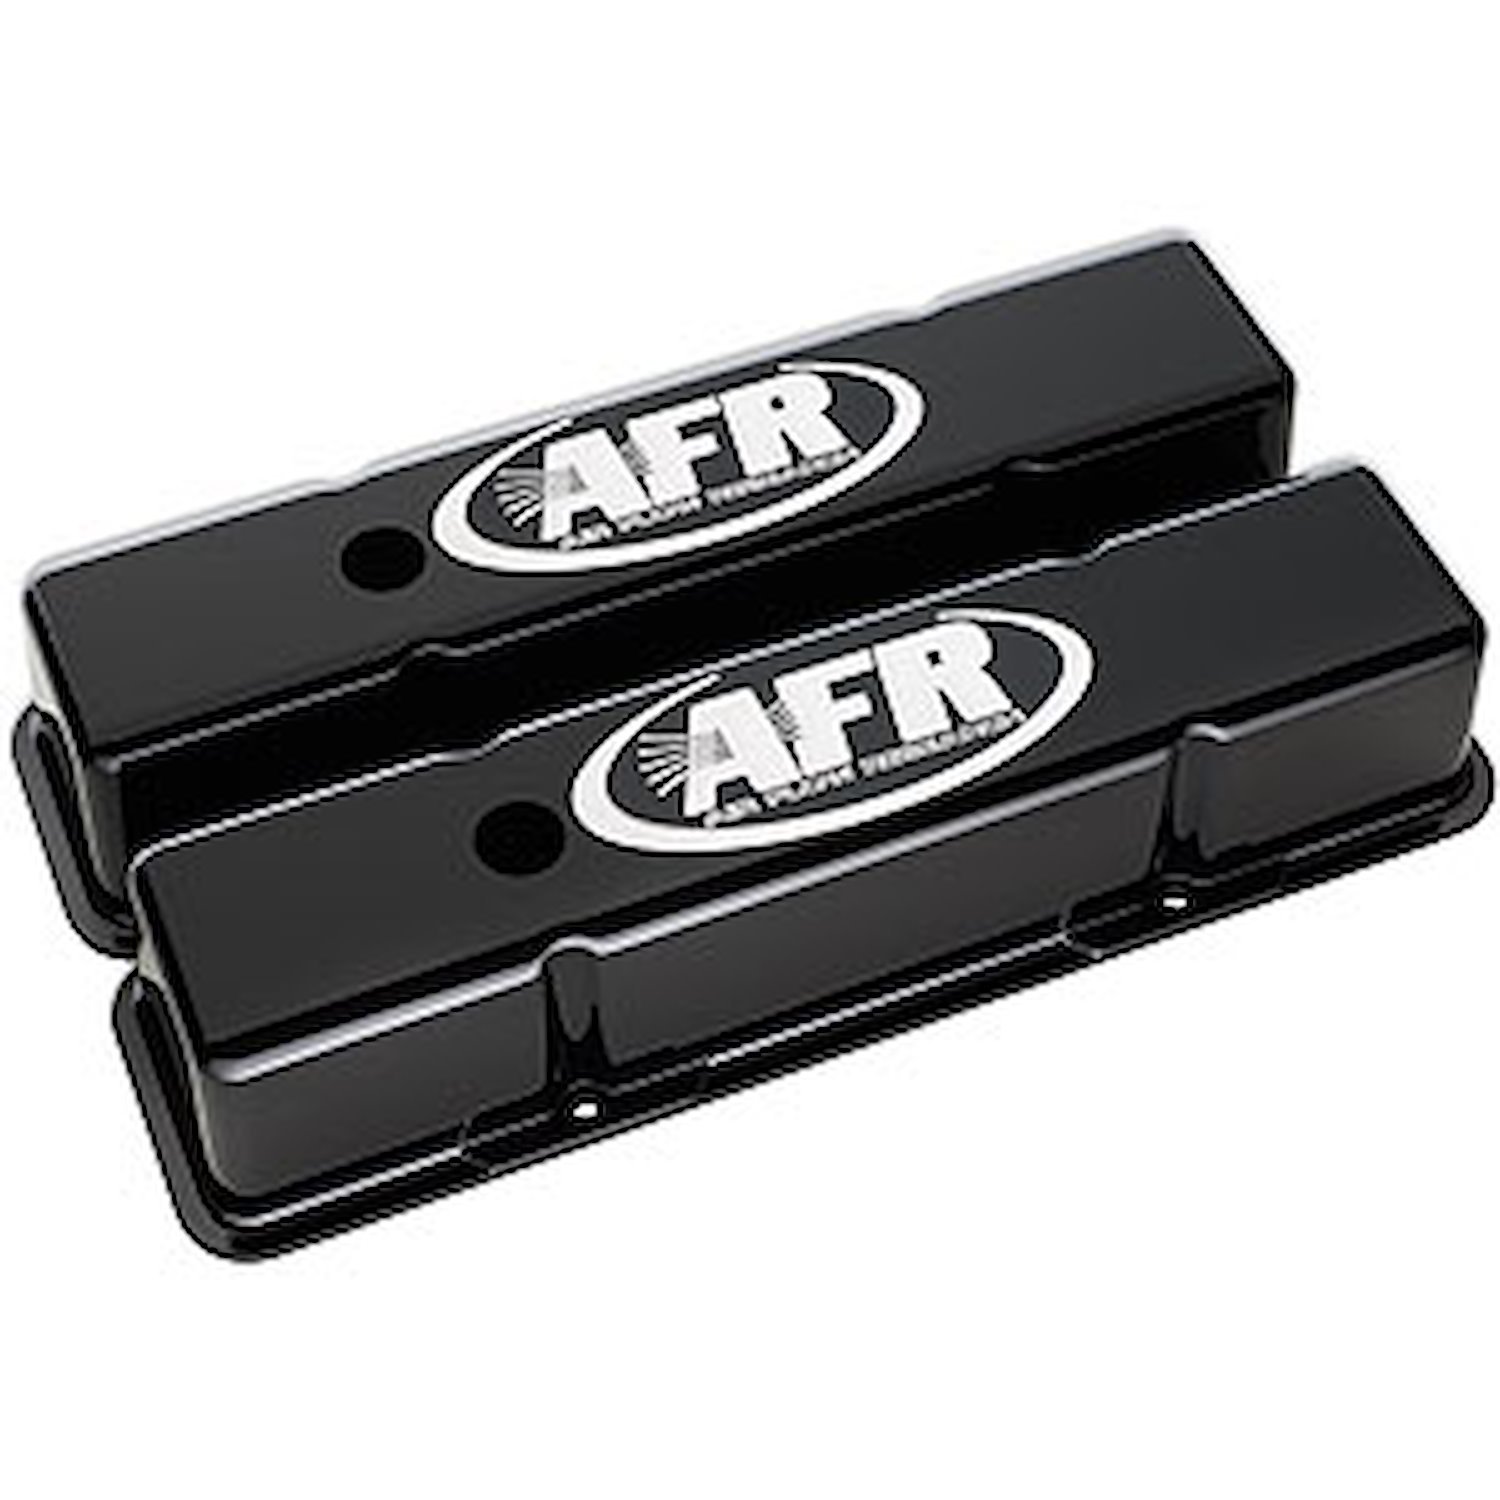 Cast Aluminum Tall Valve Covers for Small Block Chevy [Black]